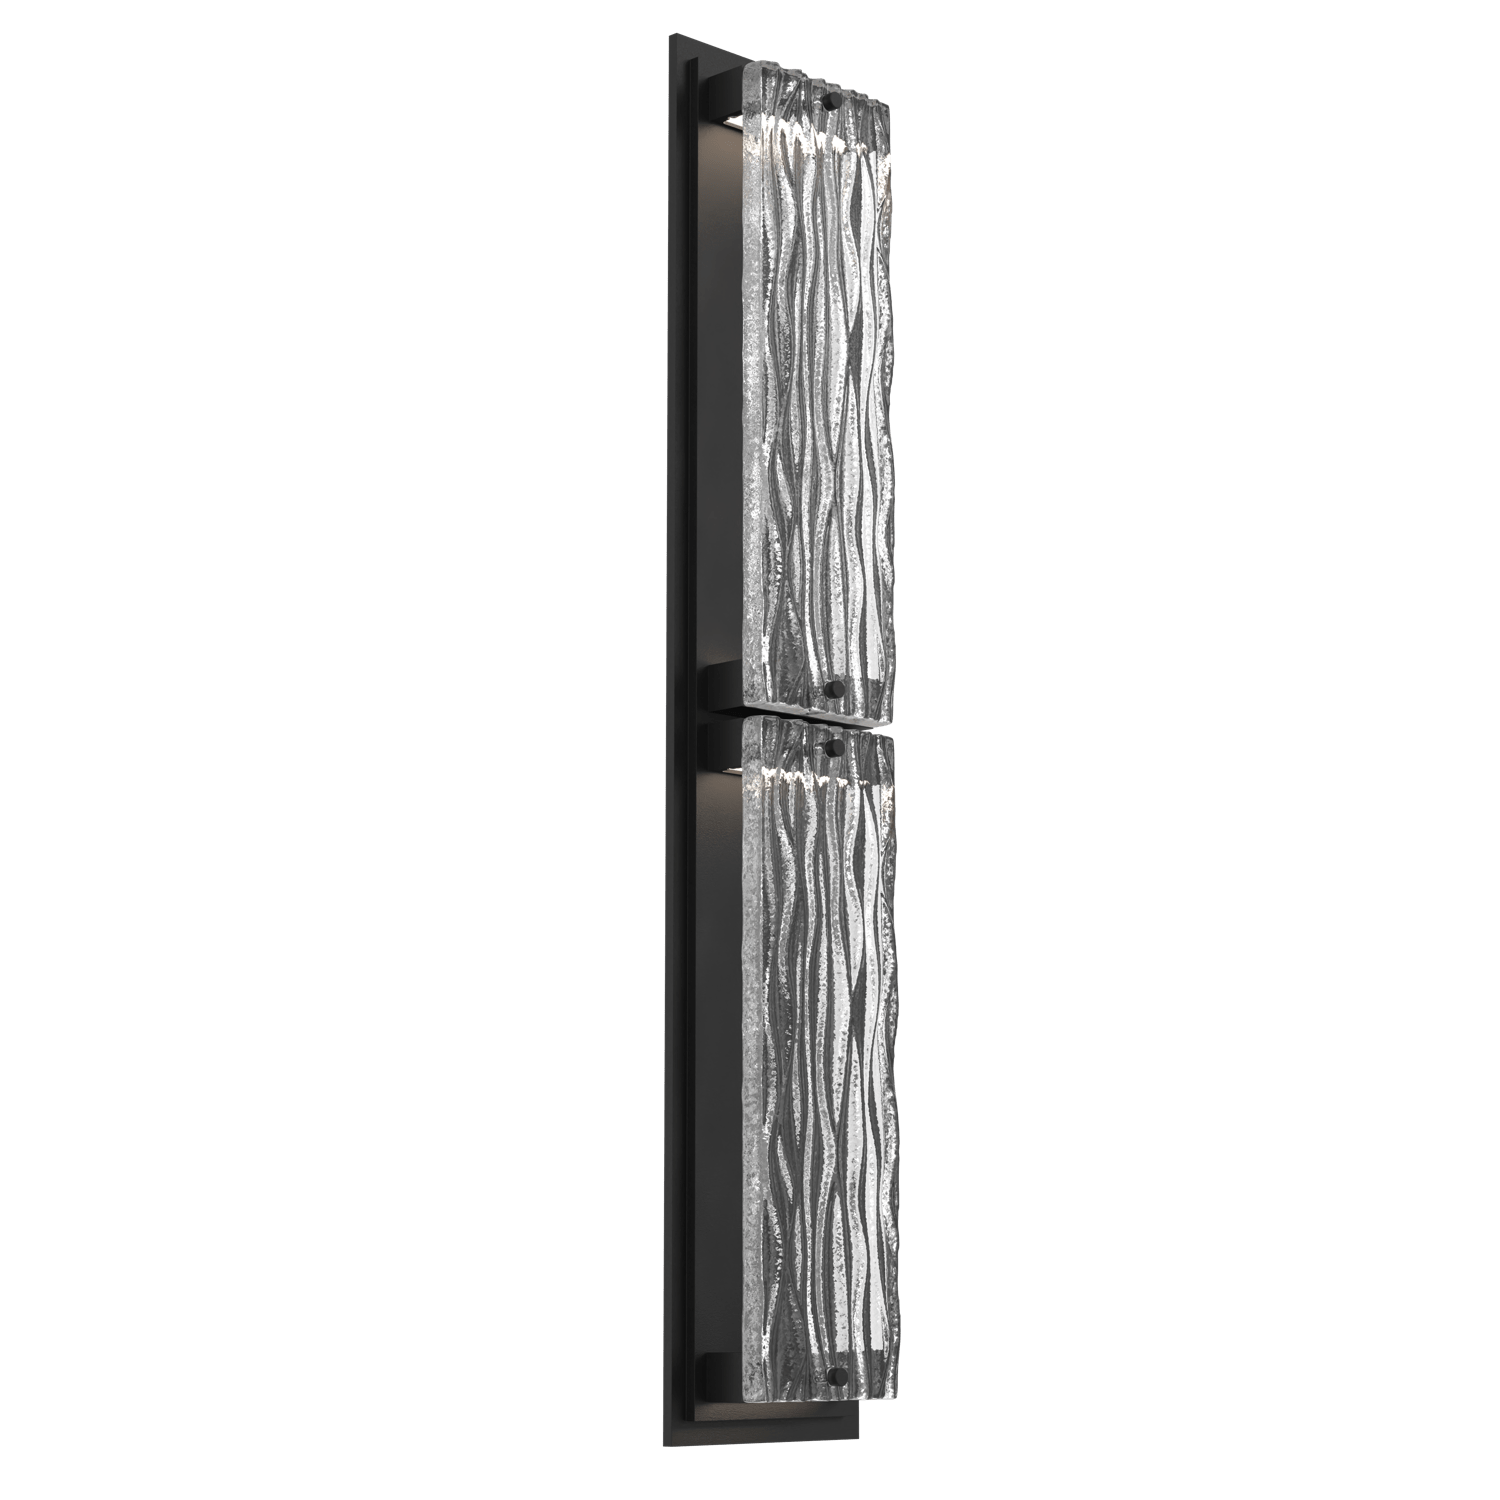 ODB0090-02-TB-TT-Hammerton-Studio-Tabulo-28-inch-outdoor-sconce-with-textured-black-finish-and-clear-tidal-cast-glass-shade-and-LED-lamping